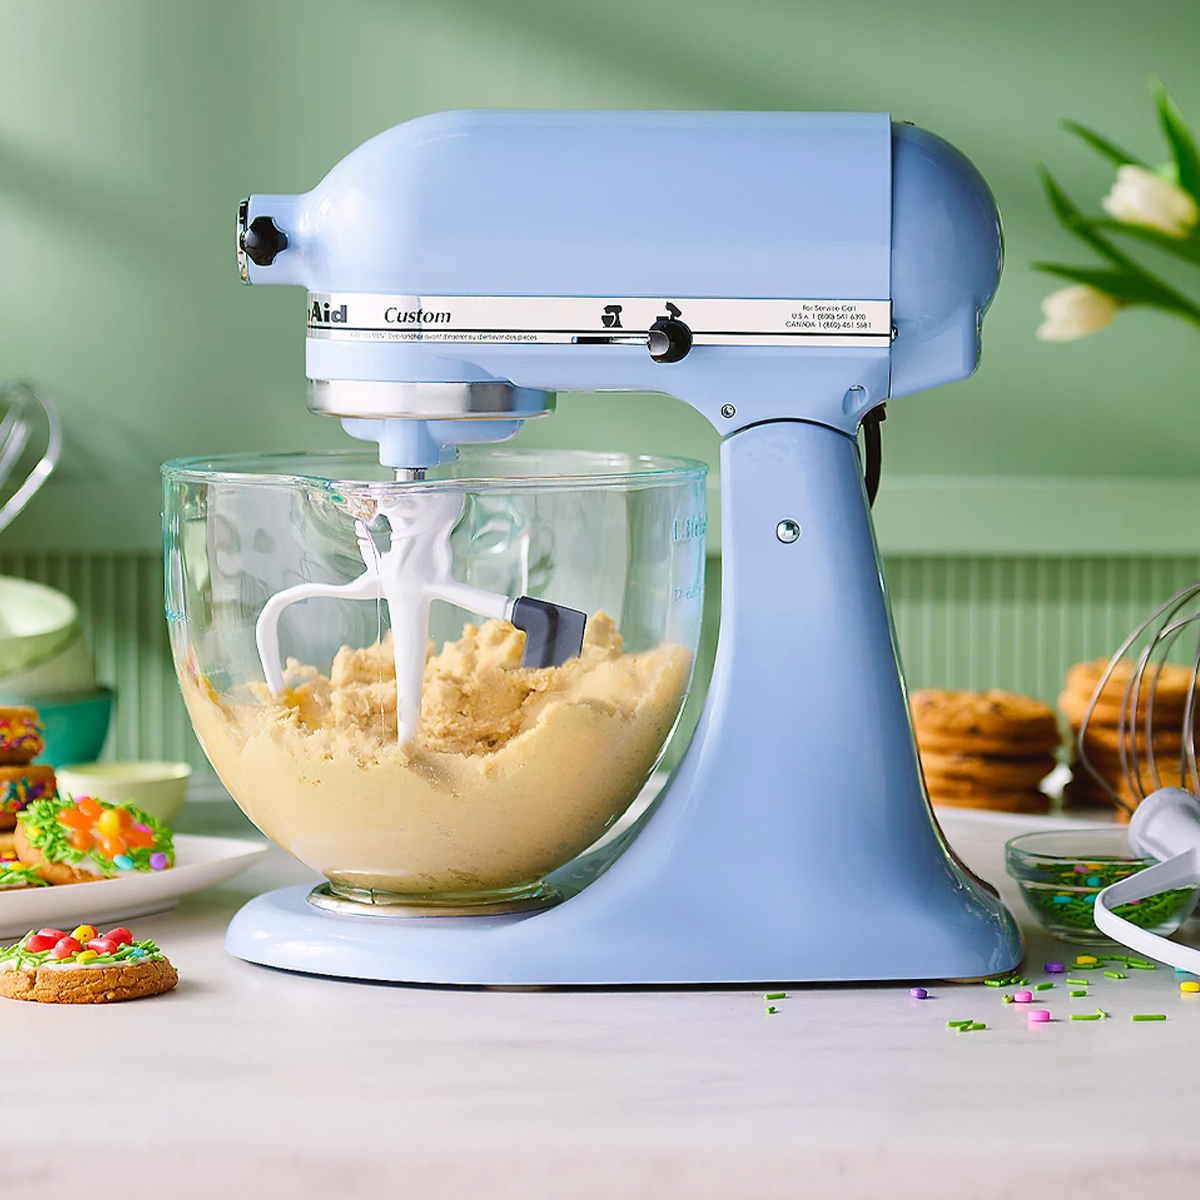 24-Hour Flash Save $80 on a KitchenAid Stand Mixer - E! Online